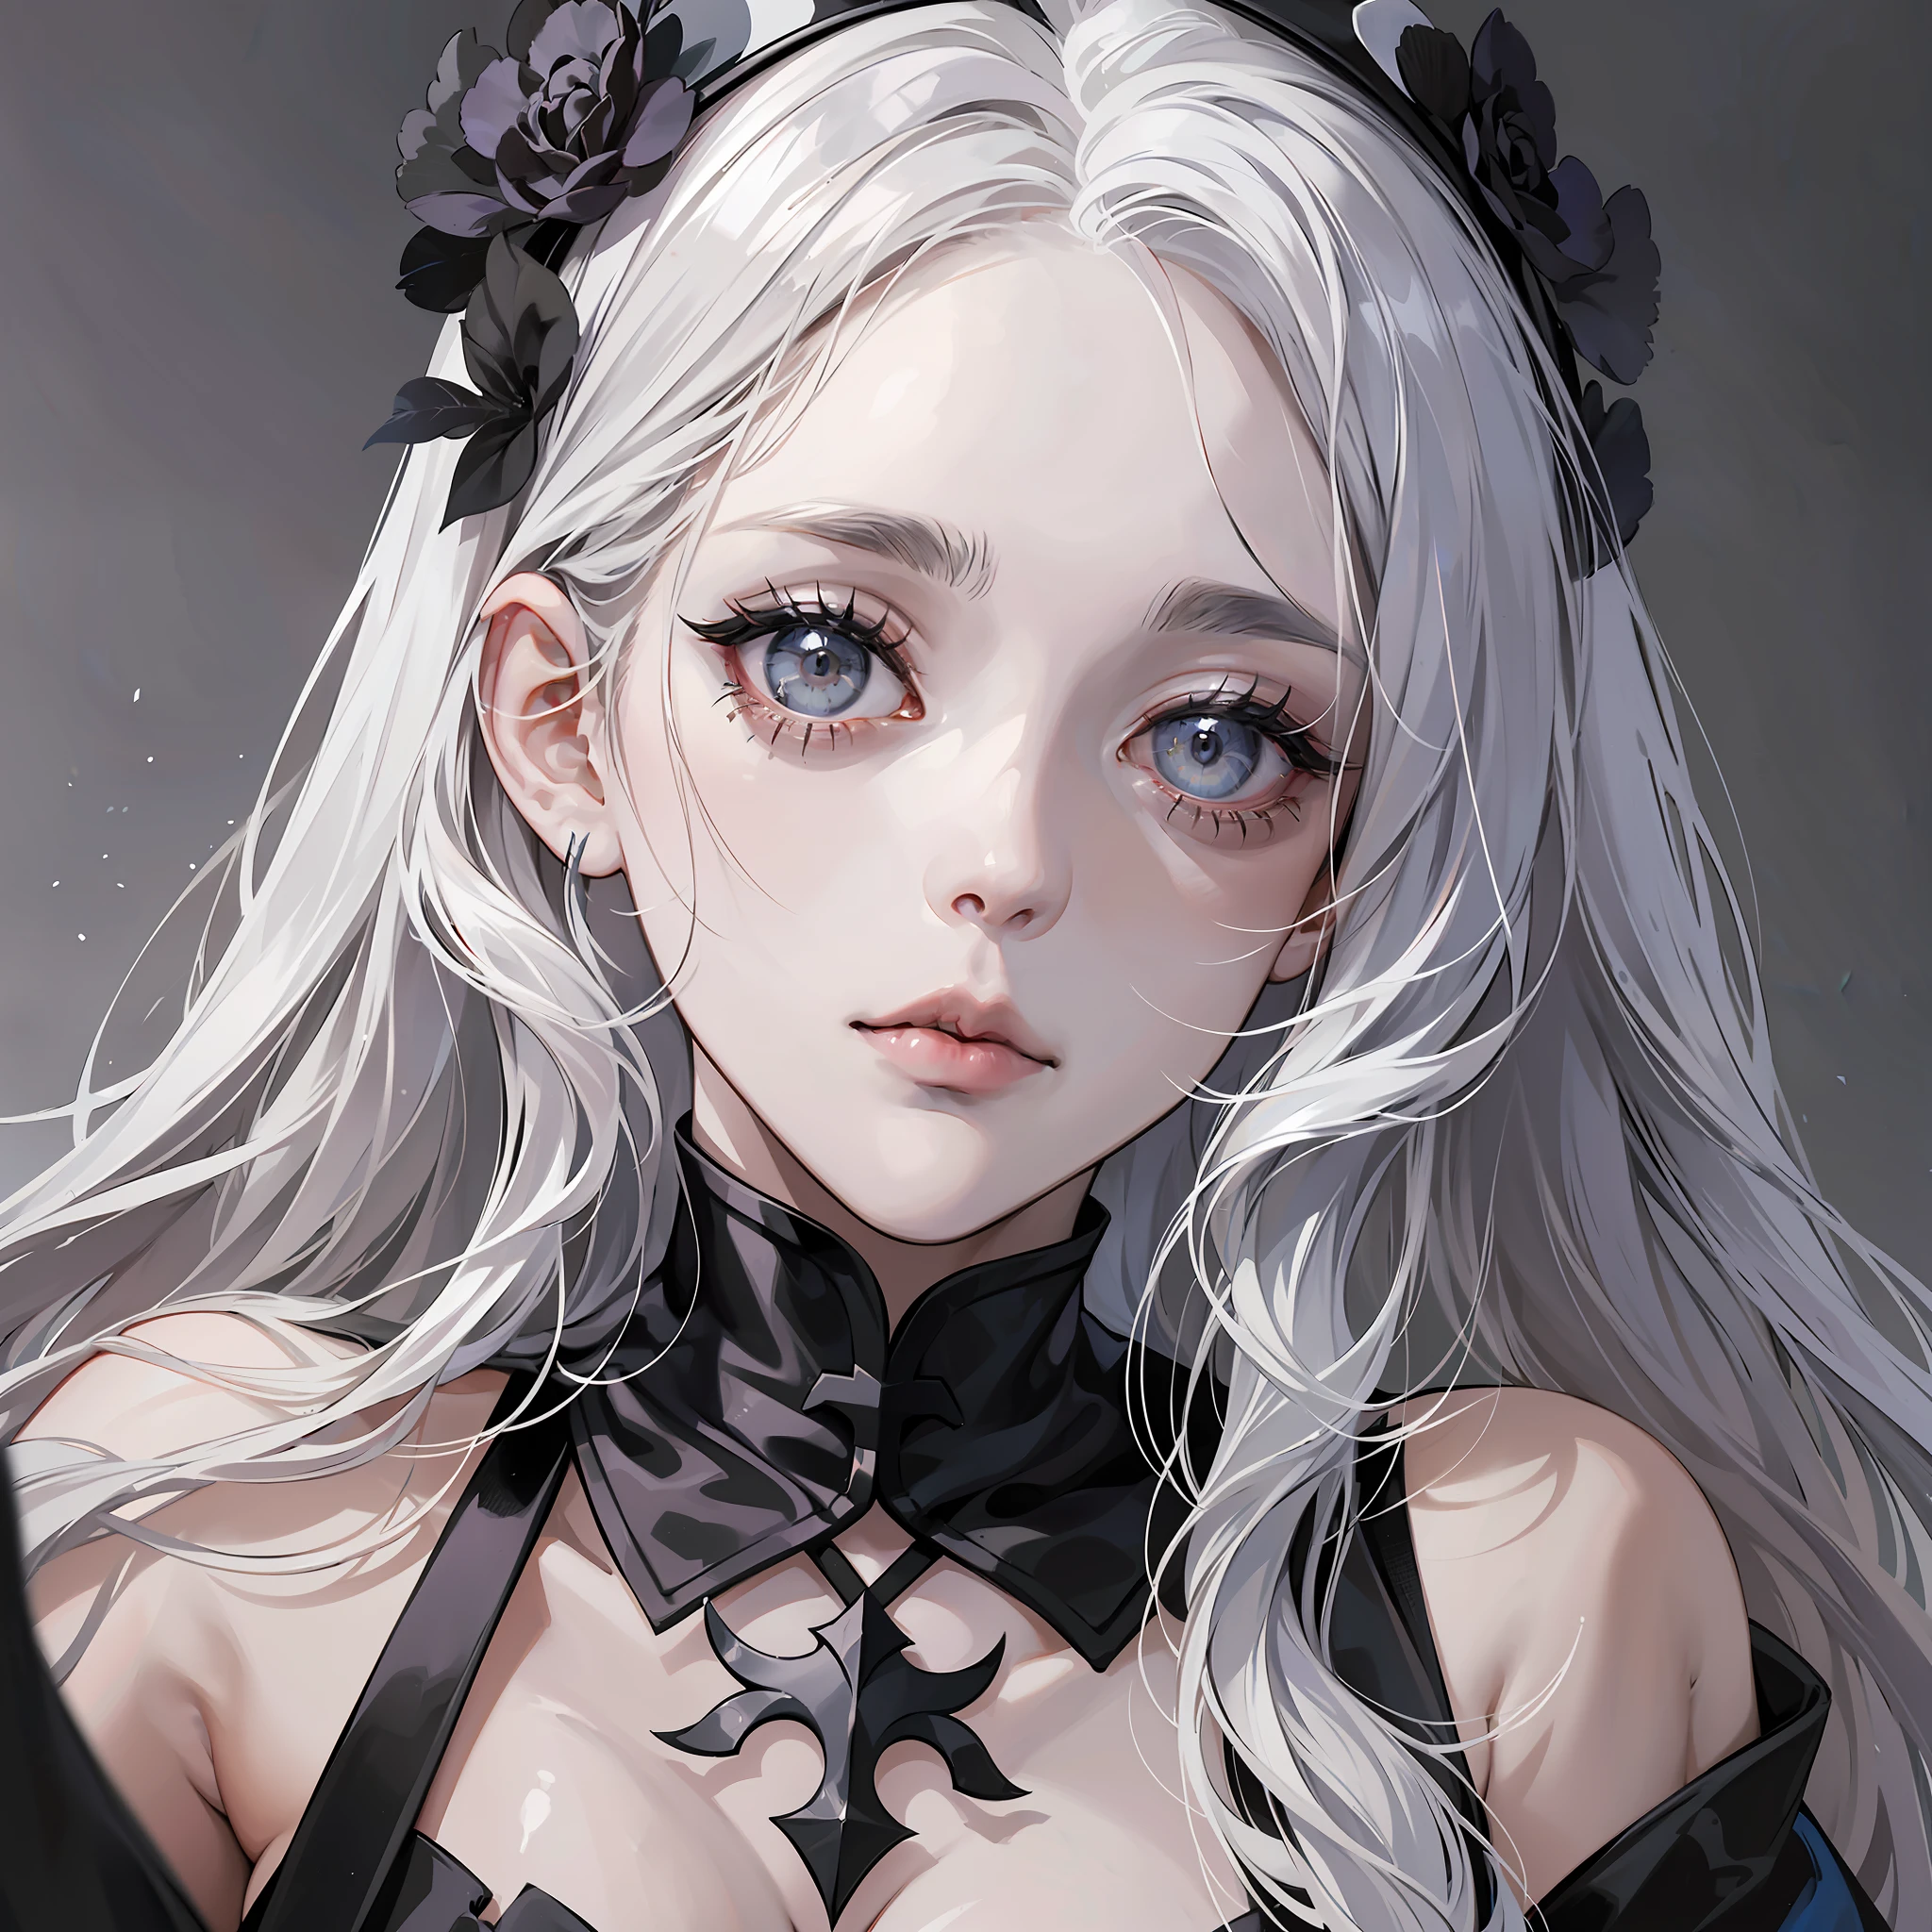 a woman with long white hair and gray eyes in a black and white dress, an imvu inspired by Martina Joanna, an obsessively beautiful zombie inspired by Takeshi Obata, a portrait of Lady Mary pale as marble, Griffith from Berserk, a portrait of an old necromancer, Billie Eilish as a sad nun --auto --s2